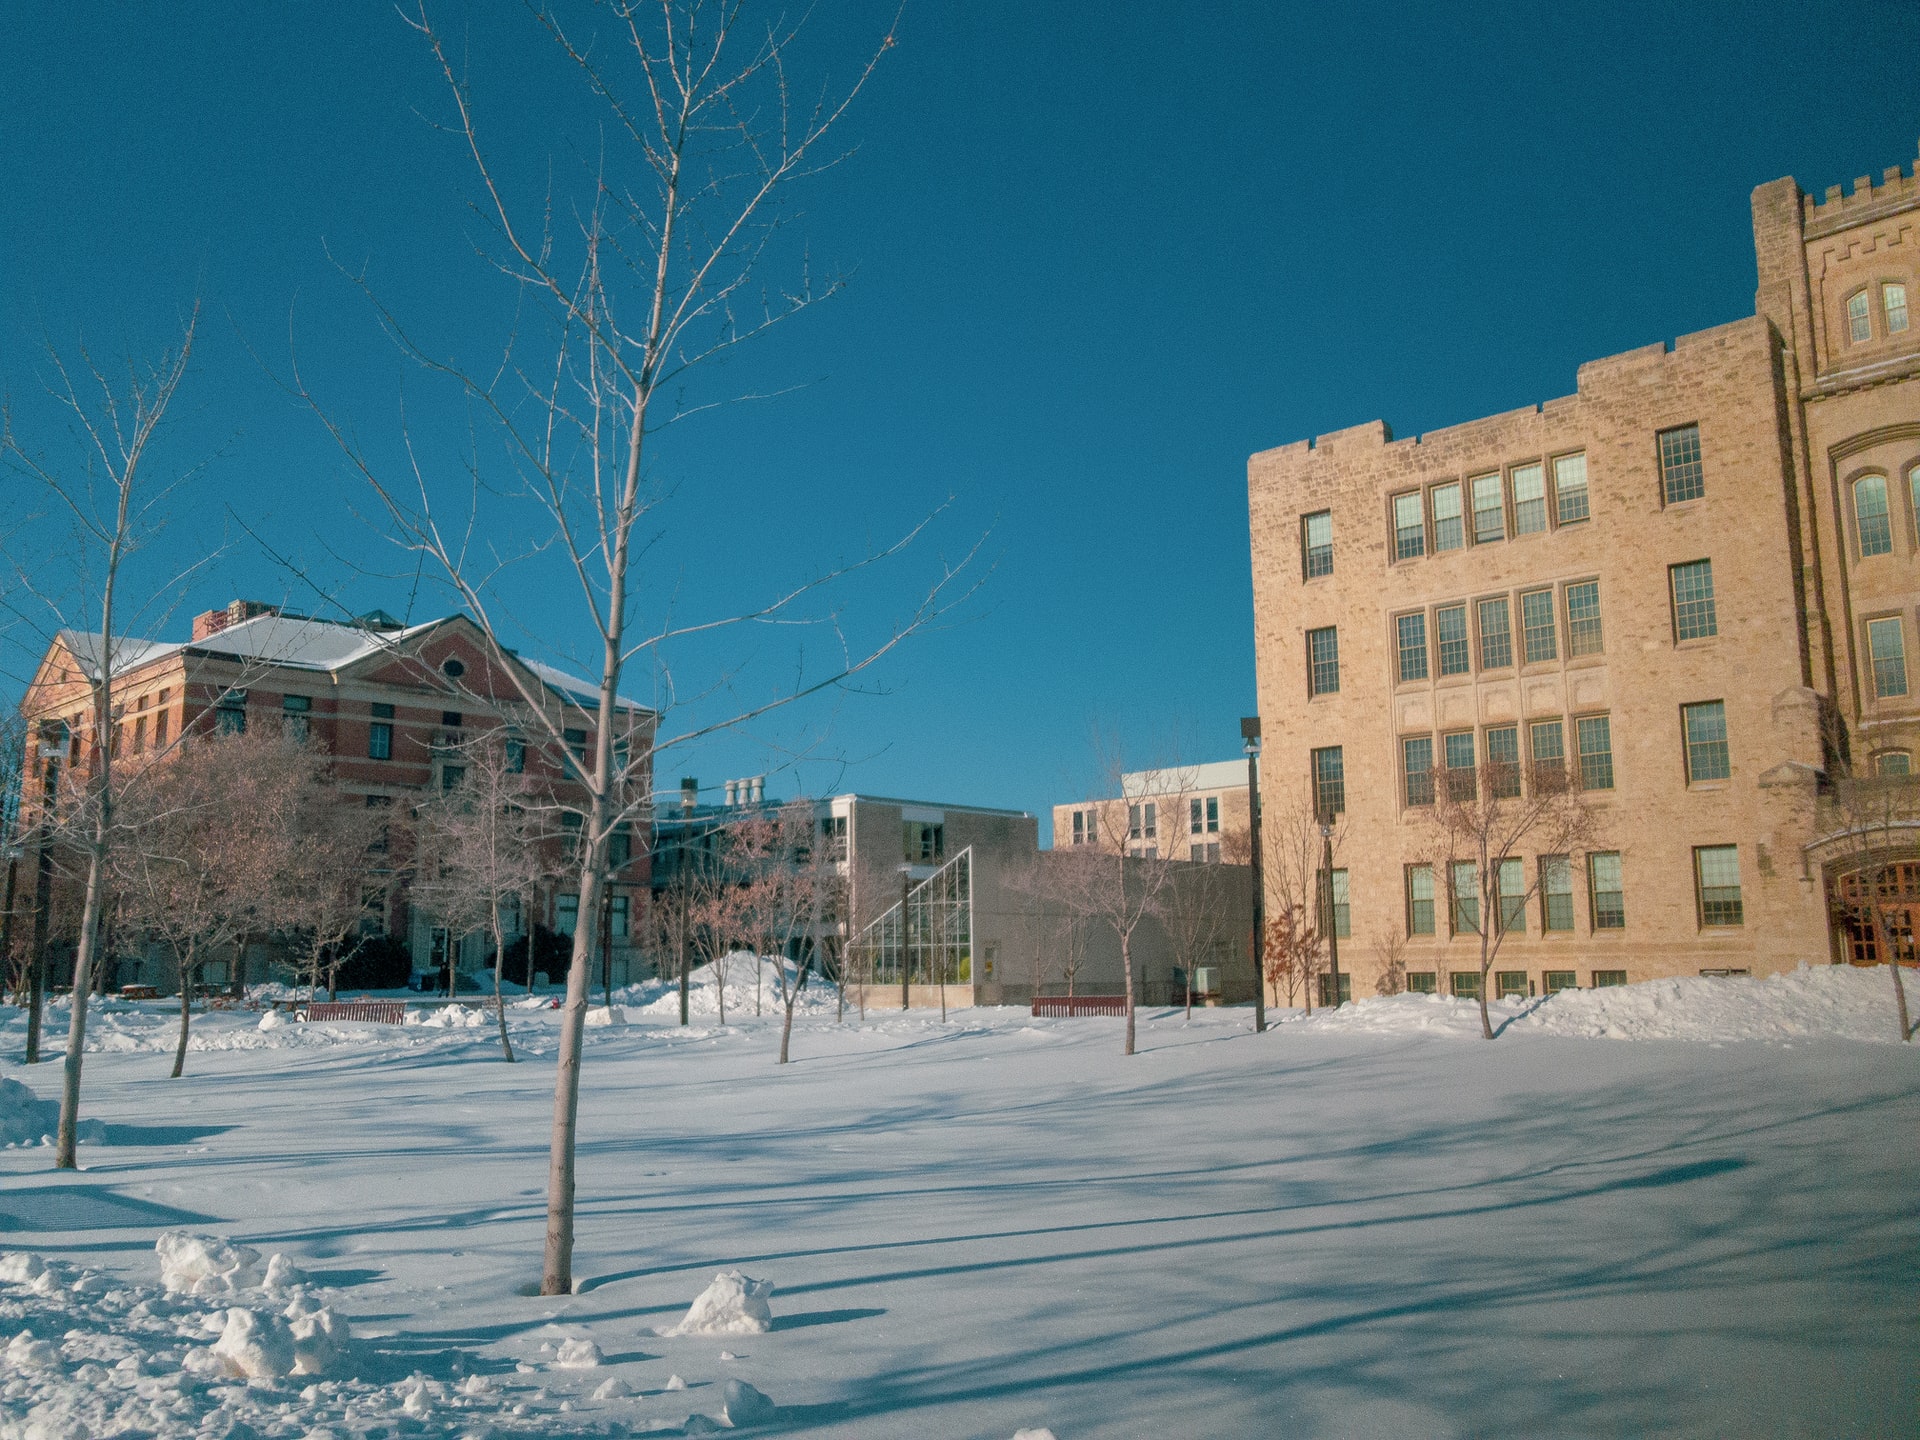 It is a snowy, cold day at the University of Manitoba.